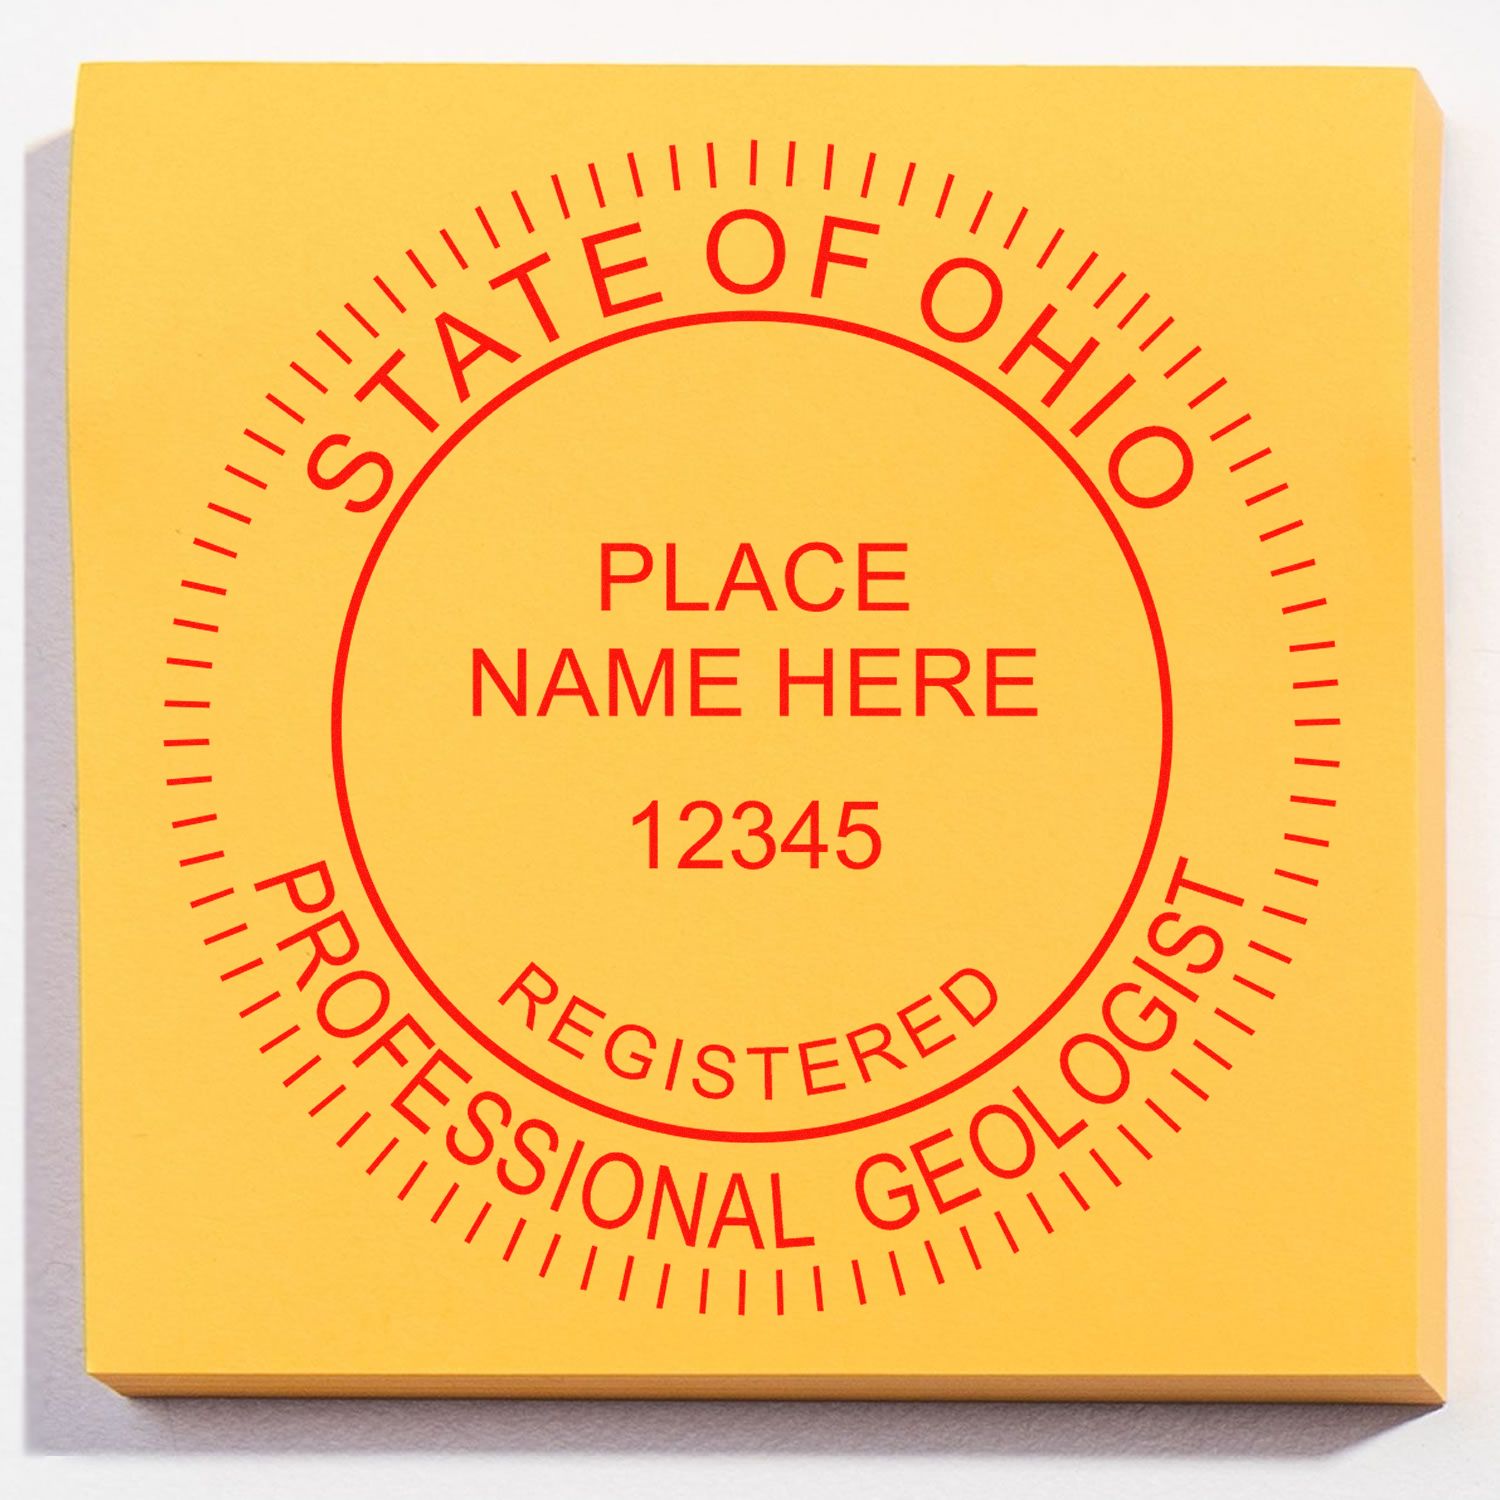 A photograph of the Self-Inking Ohio Geologist Stamp stamp impression reveals a vivid, professional image of the on paper.